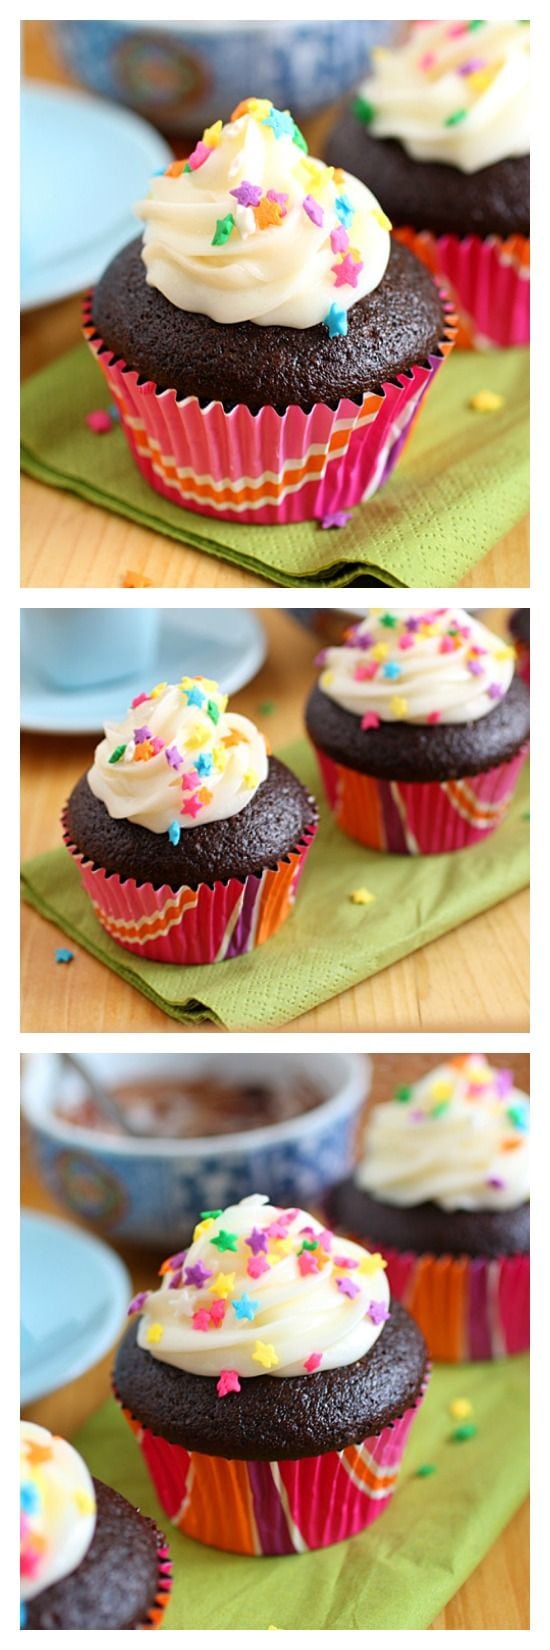 Chocolate Cupcakes and chocolate cupcakes reicpe. All kids love these chocolate cupcakes, especially with the ganache filling, frosting & sprinkles. | rasamalaysia.com